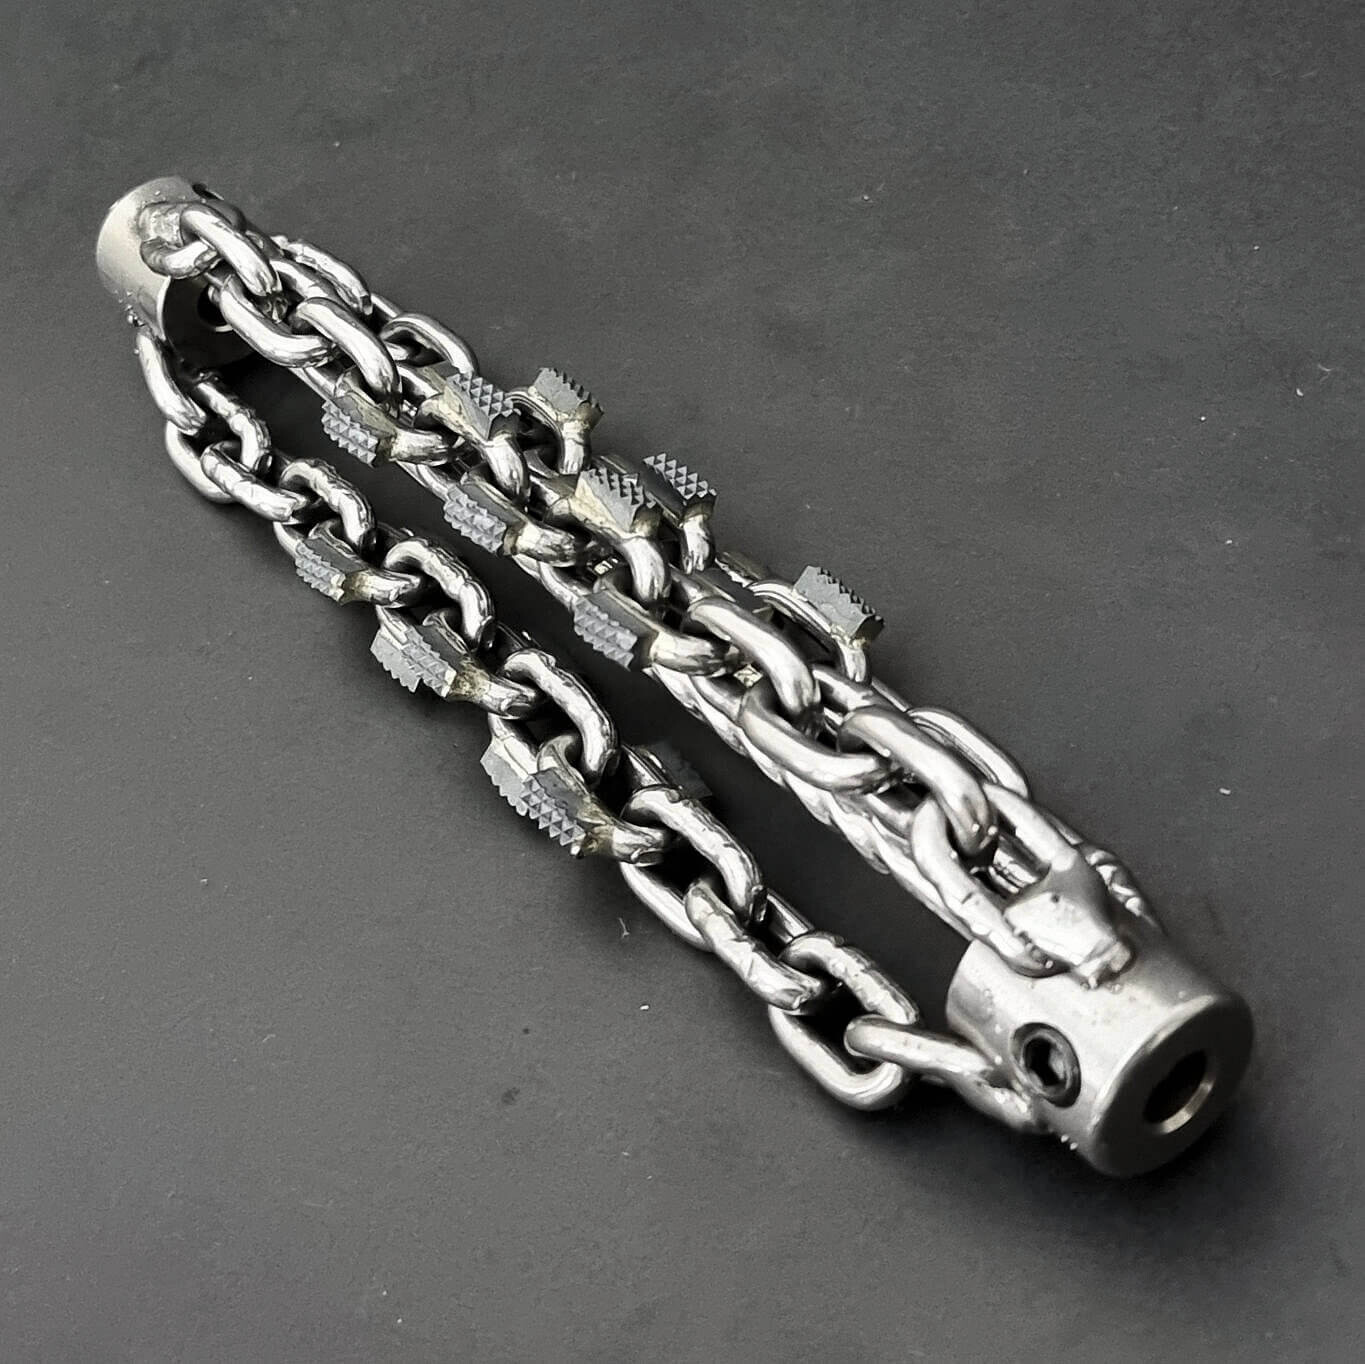 Lightweight - Croco Chain (Cast Iron & Clay Pipes) perfect sewer cleaner to use with your flexible Ridgid shaft or drain cleaning machine instead of a miller machine